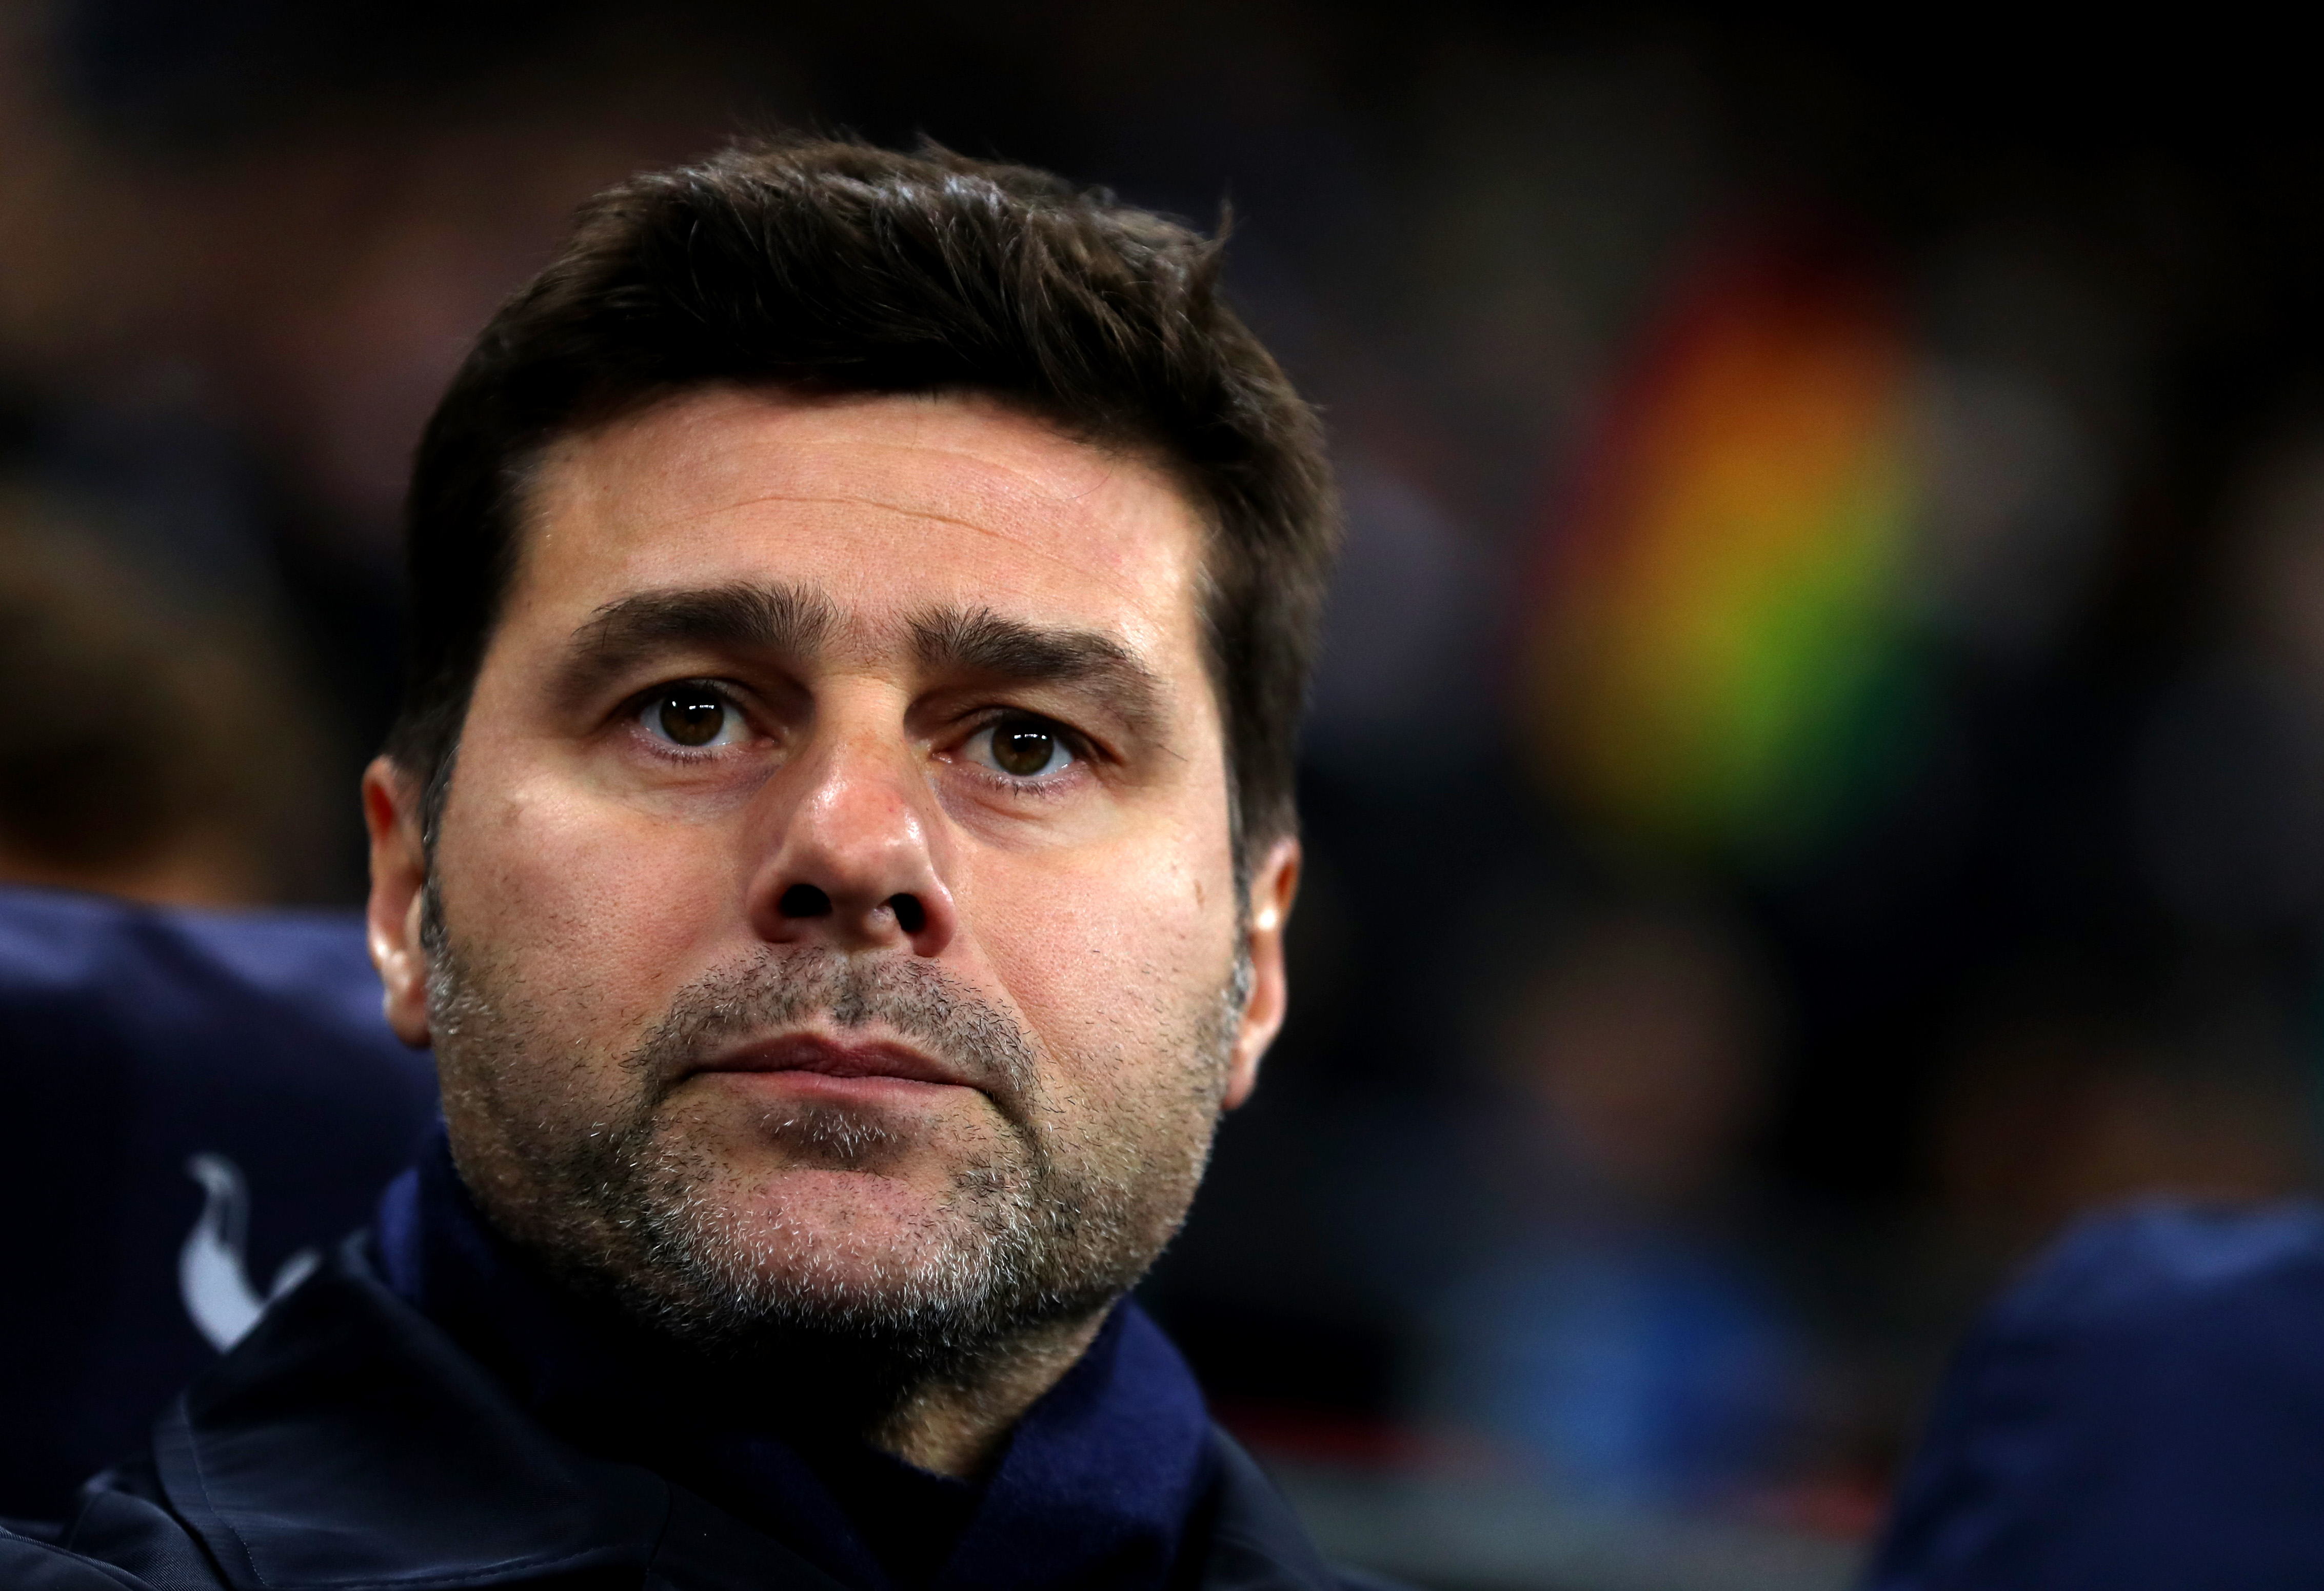 LONDON, ENGLAND - NOVEMBER 28: Mauricio Pochettino manager / head coach of Tottenham Hotspur' during the Group B match of the UEFA Champions League between Tottenham Hotspur and FC Internazionale at Wembley Stadium on November 28, 2018 in London, United Kingdom. (Photo by Catherine Ivill/Getty Images)